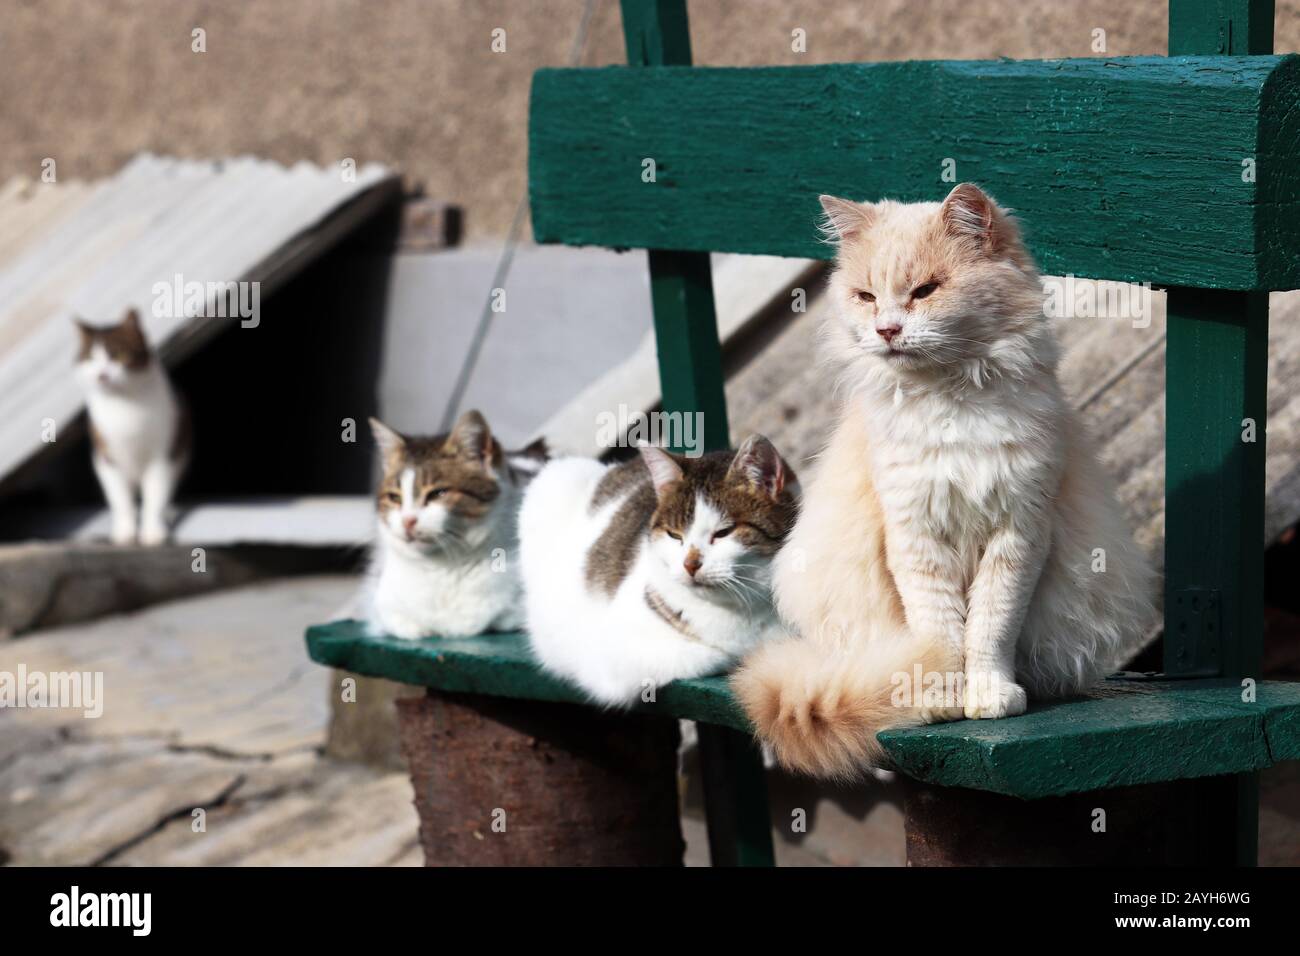 Cats sitting on a green wooden bench. Four cute animals in sunny weather looking in the same direction, rural scene in village Stock Photo